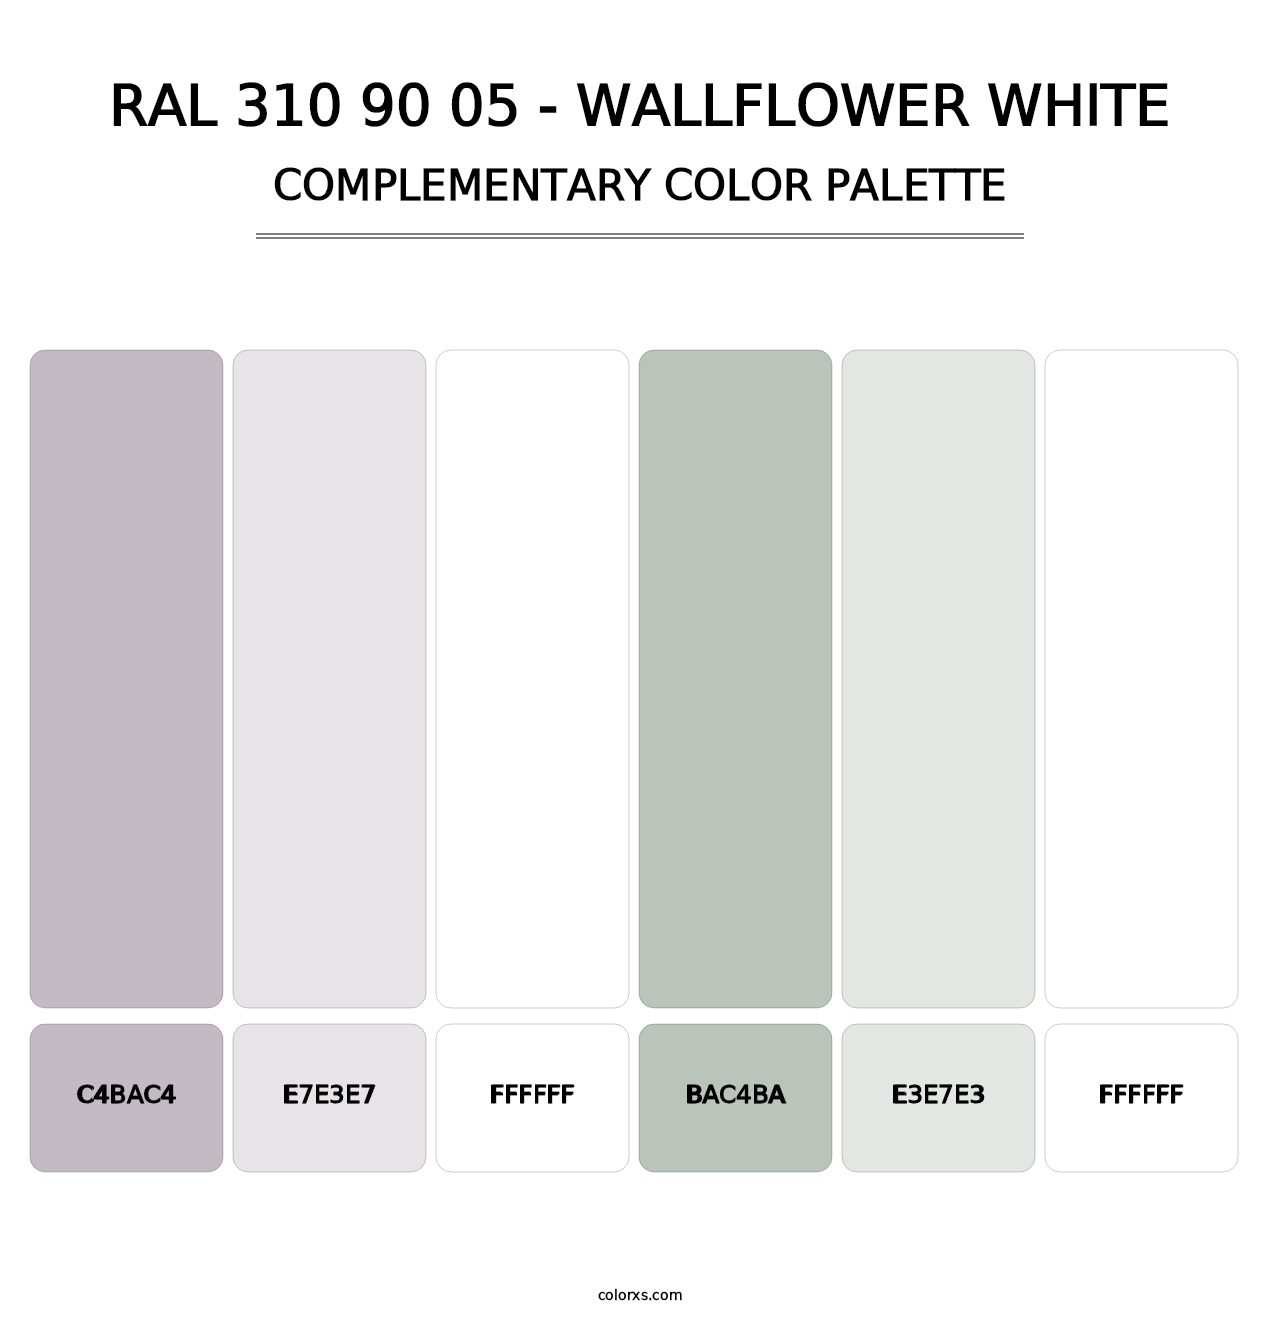 RAL 310 90 05 - Wallflower White - Complementary Color Palette